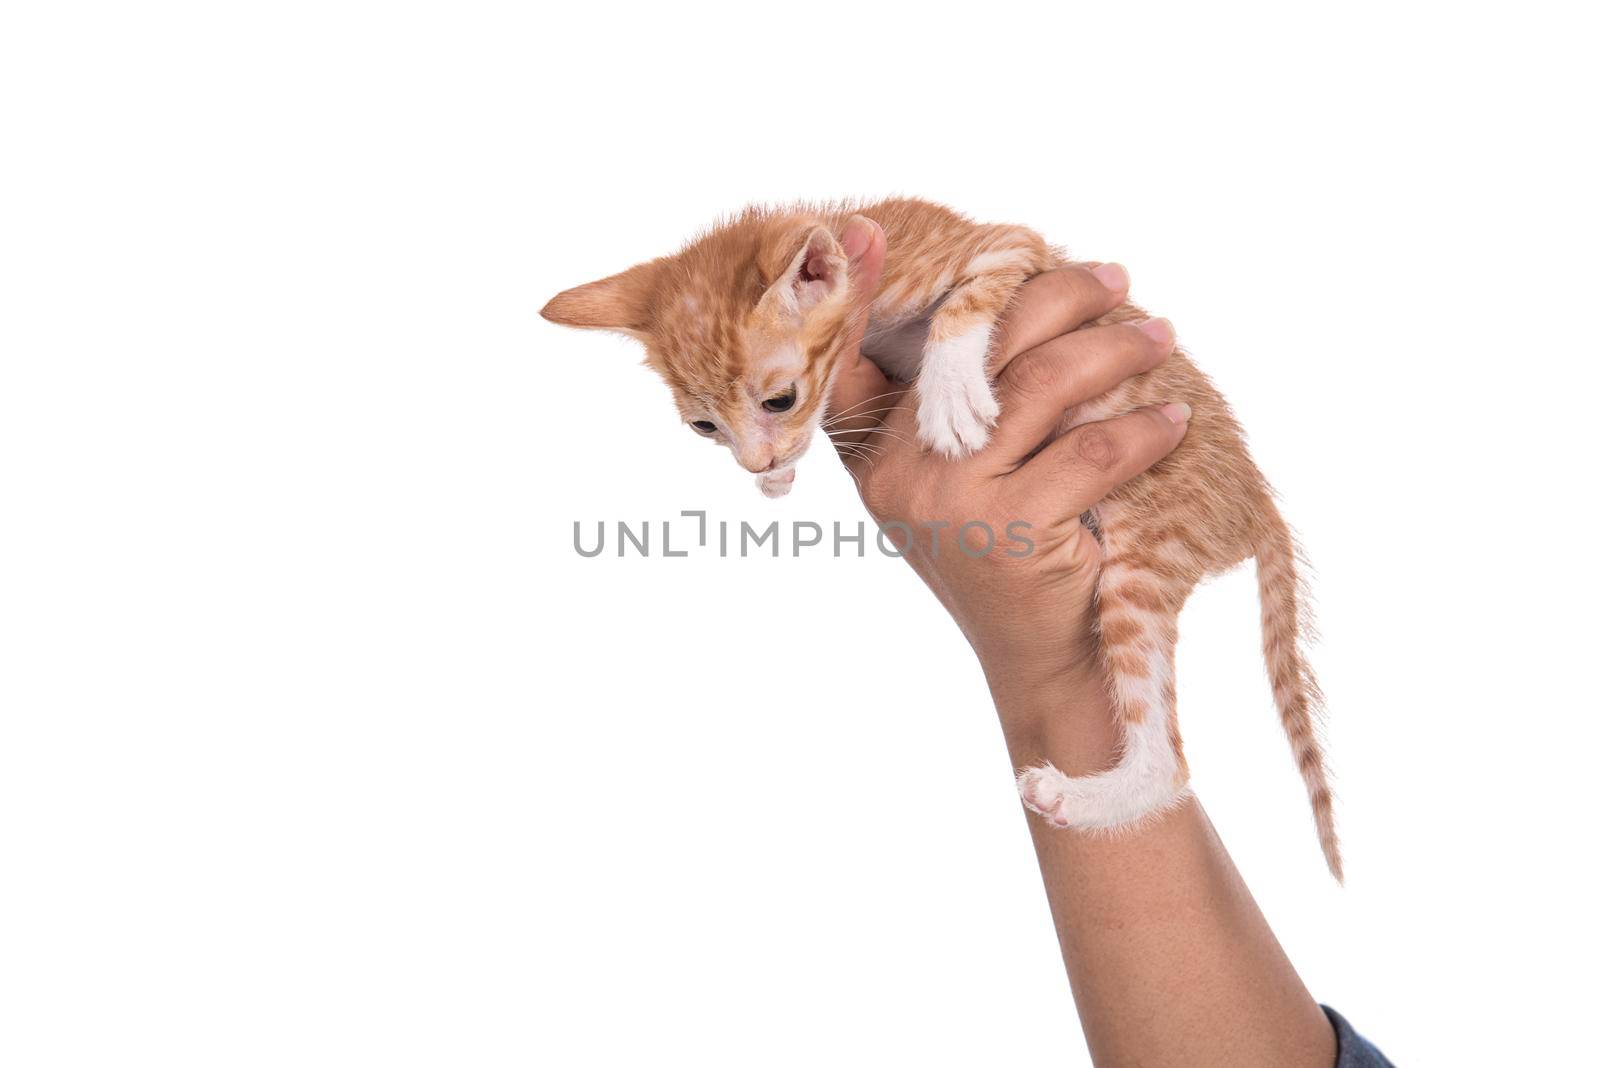 Small kitten in human hand on white background by DipakShelare